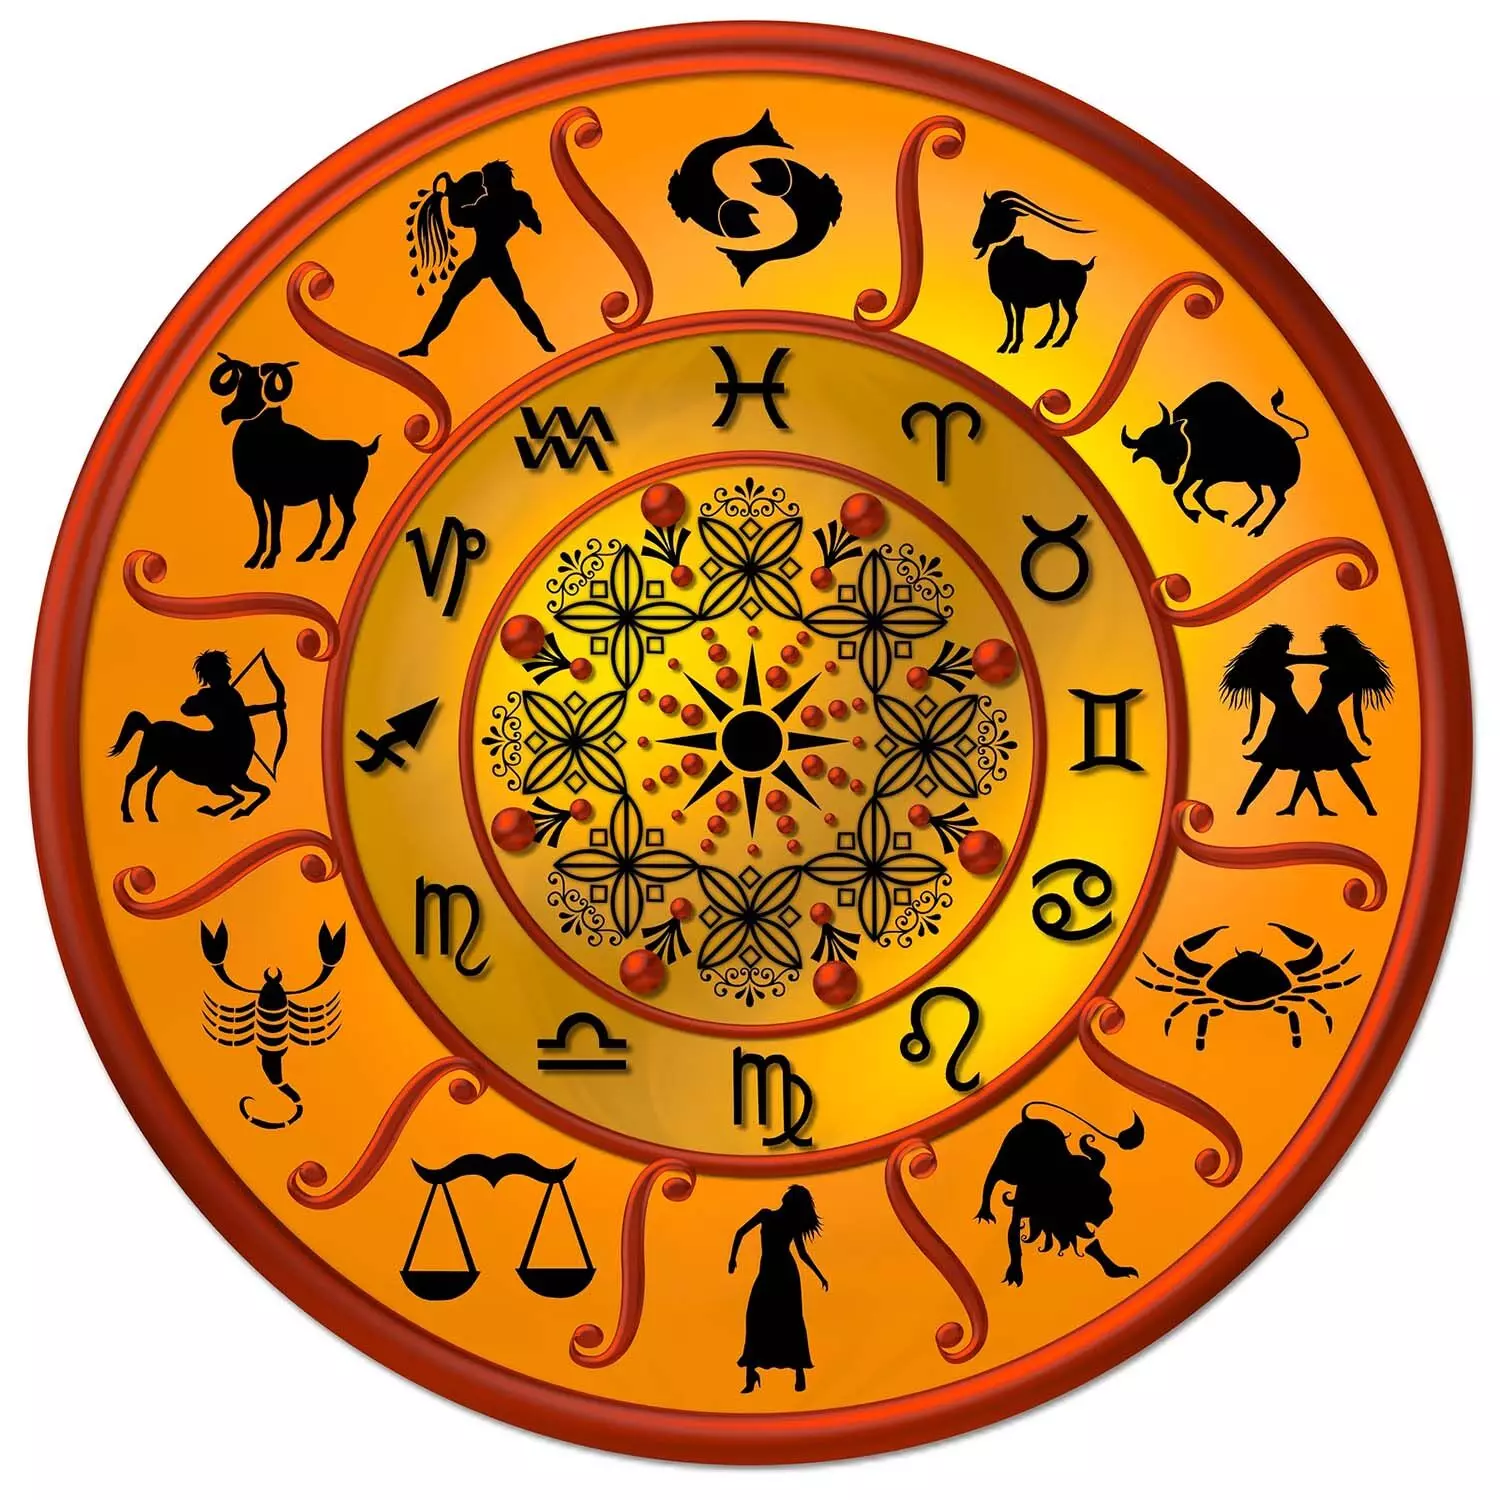 25 June – Know your todays horoscope